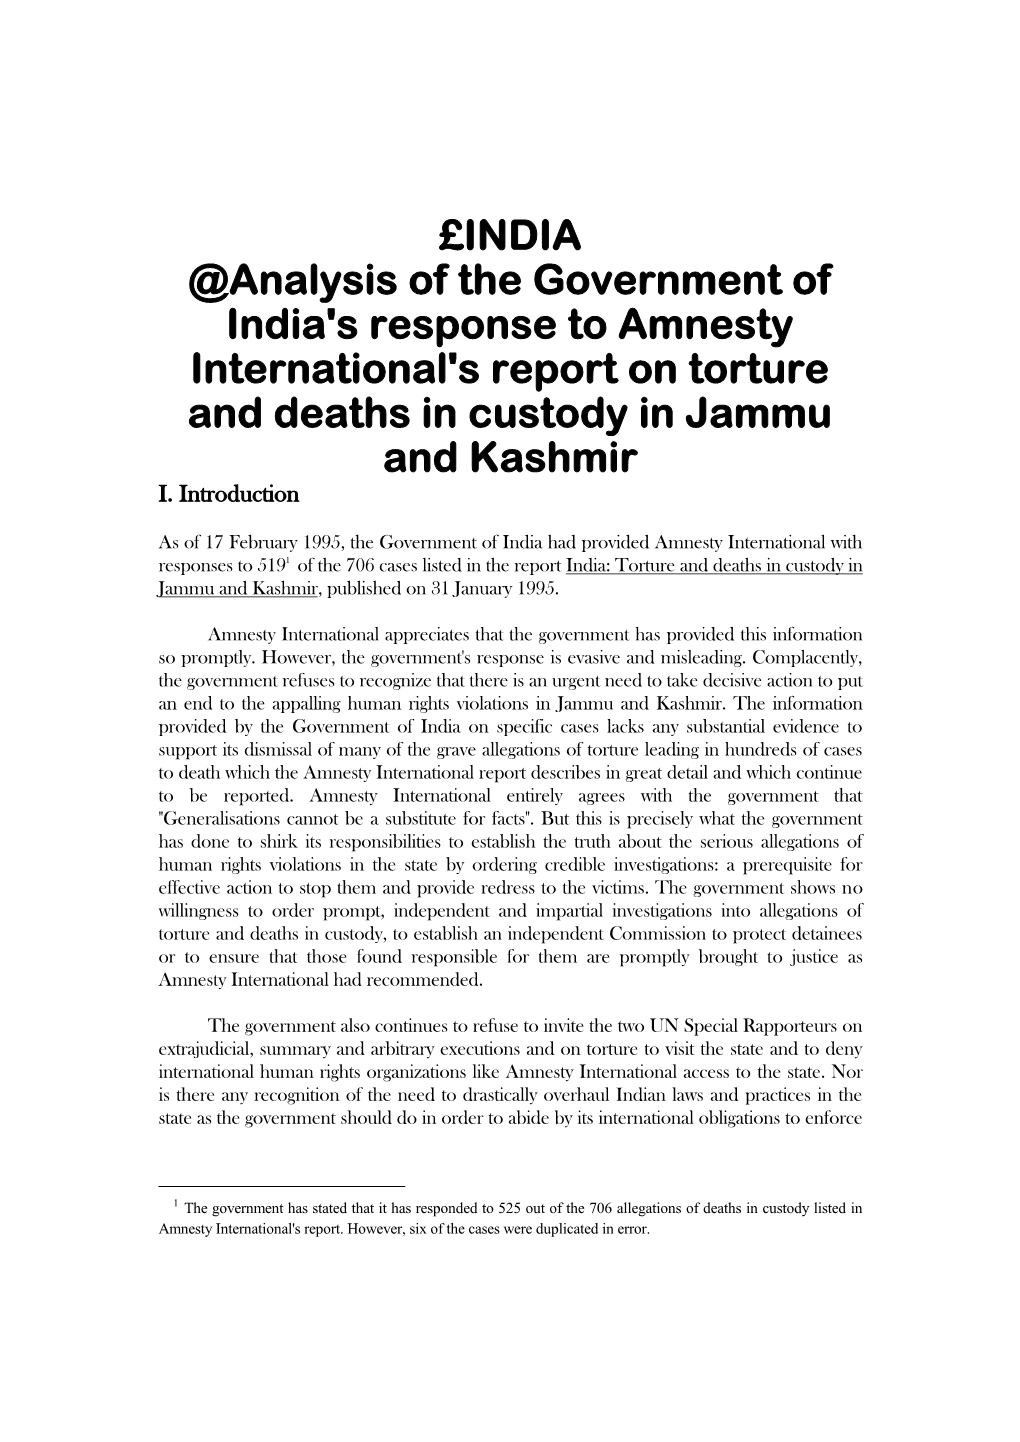 INDIA @Analysis of the Government of India's Response to Amnesty International's Report on Torture and Deaths in Custody in Jammu and Kashmir I